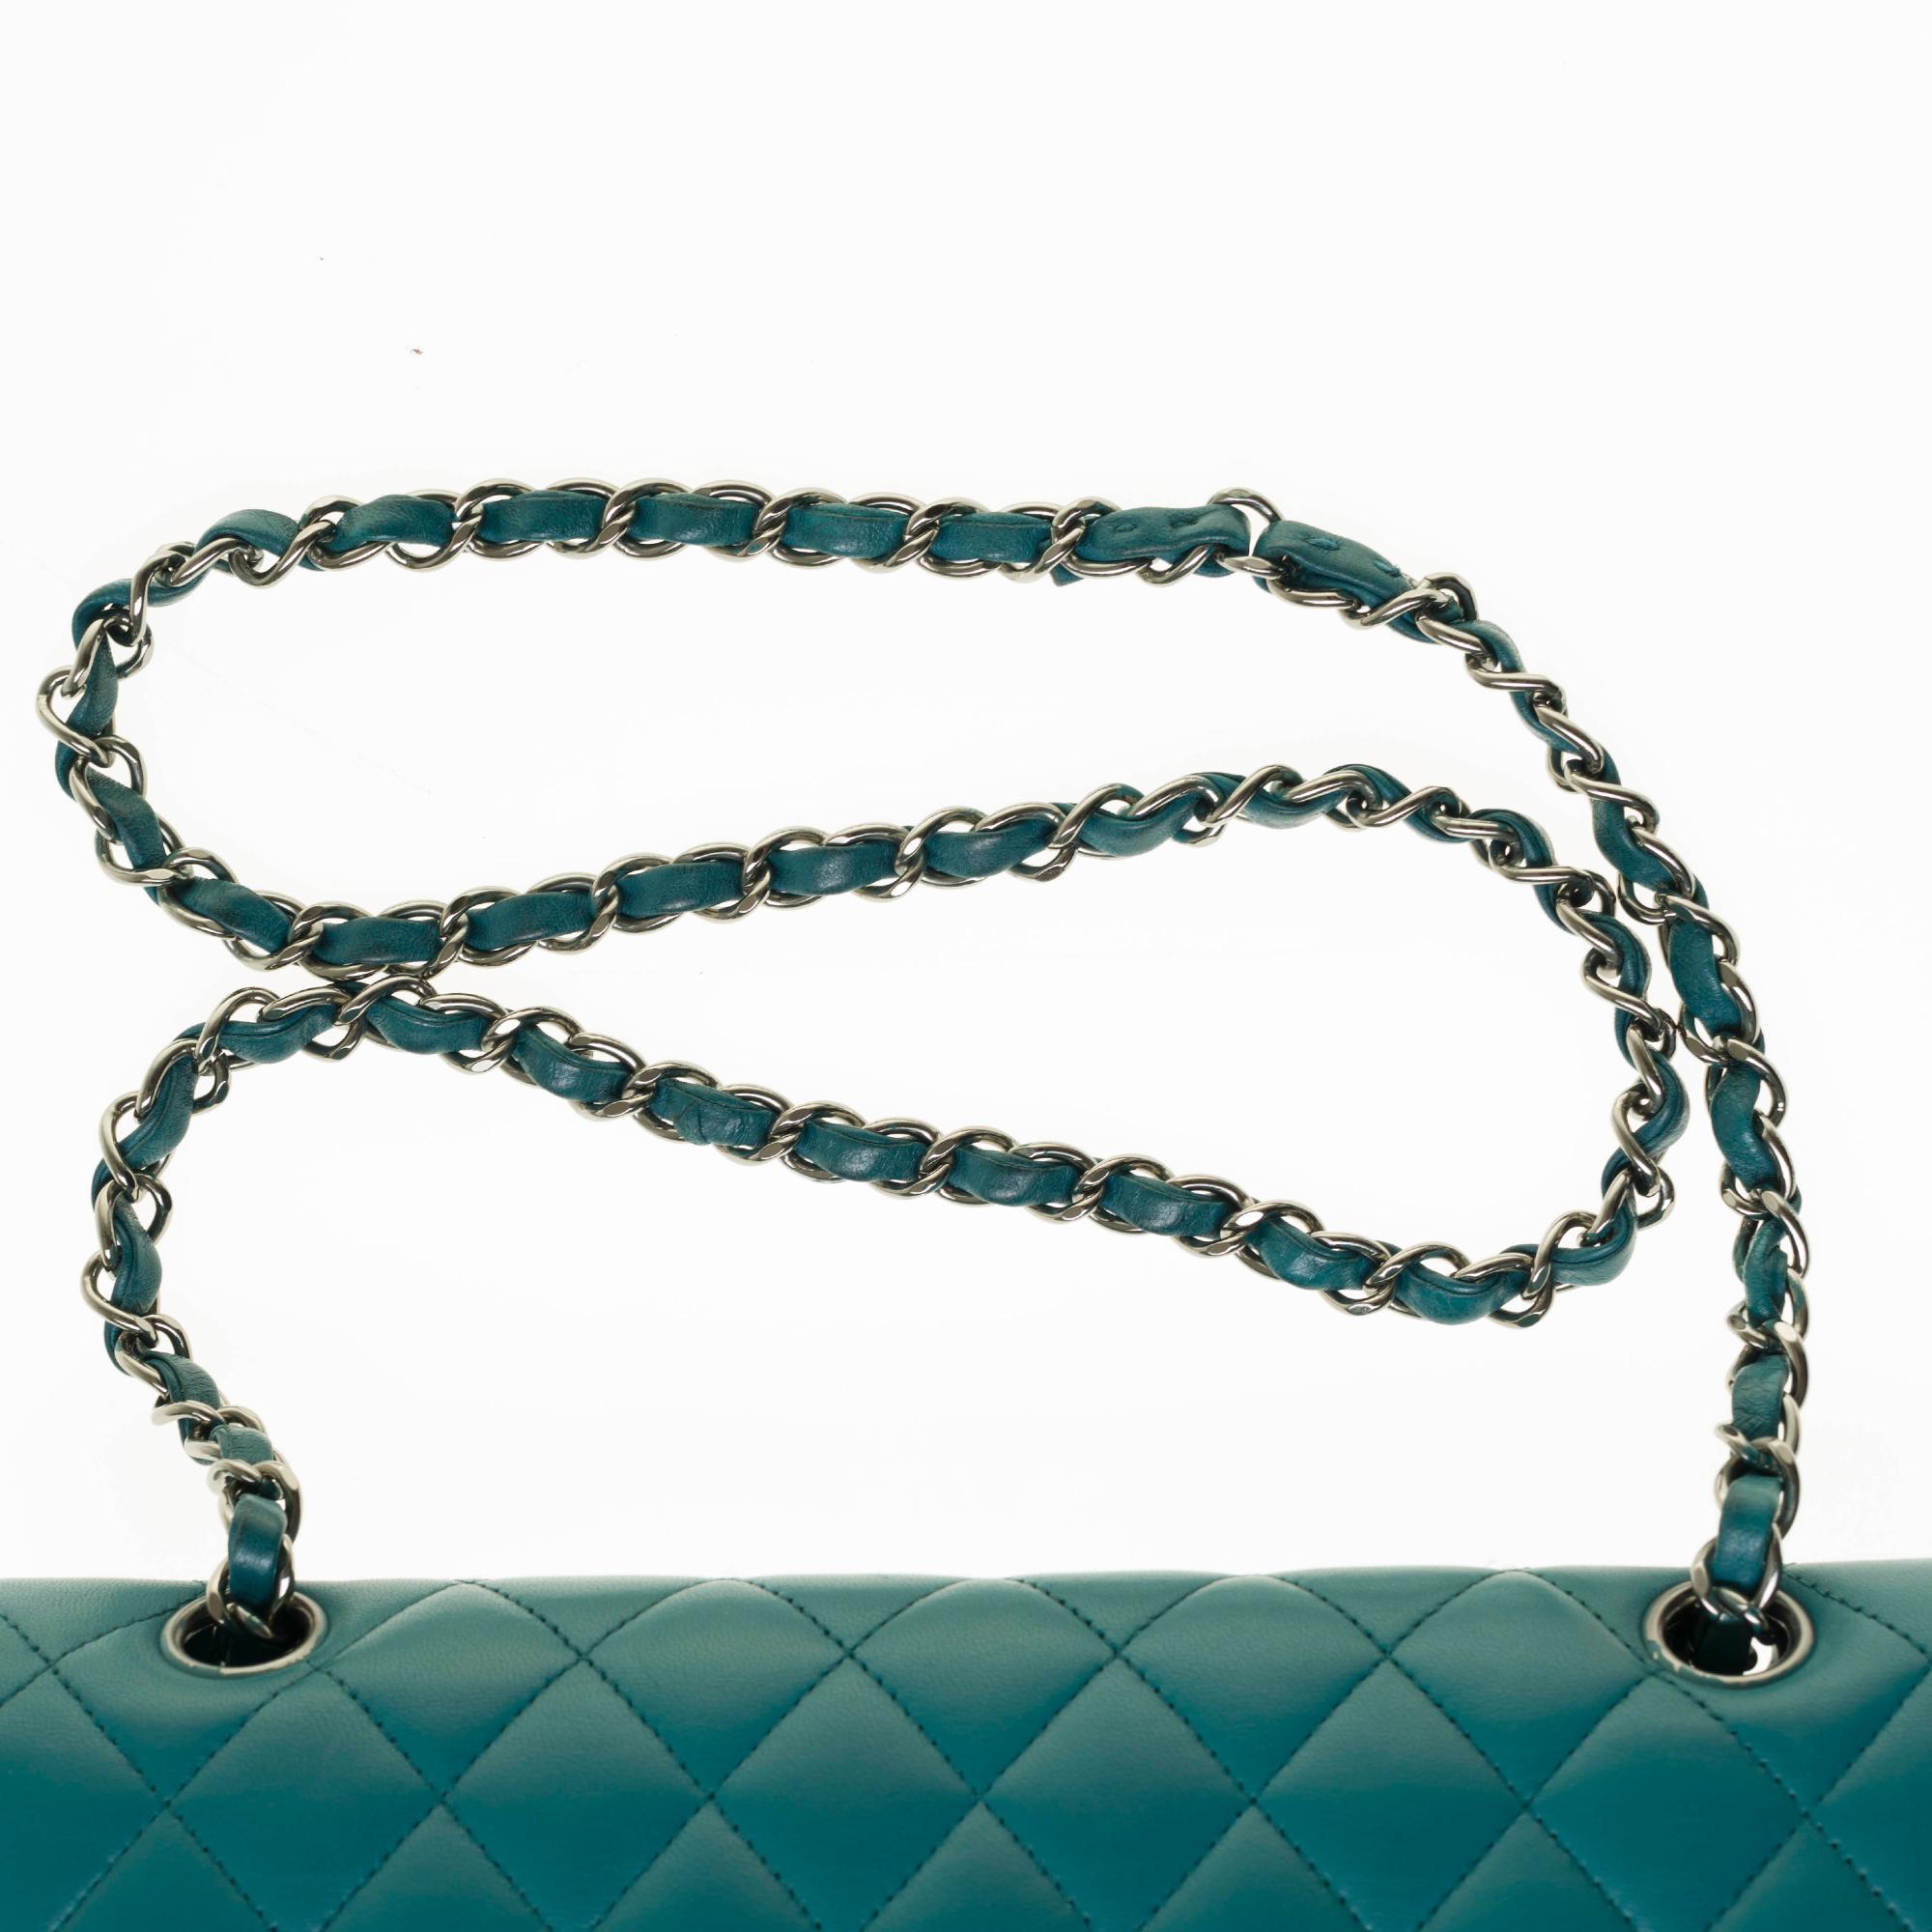 Amazing Chanel 2.55 handbag in green quilted lamb leather, Silver hardware 3